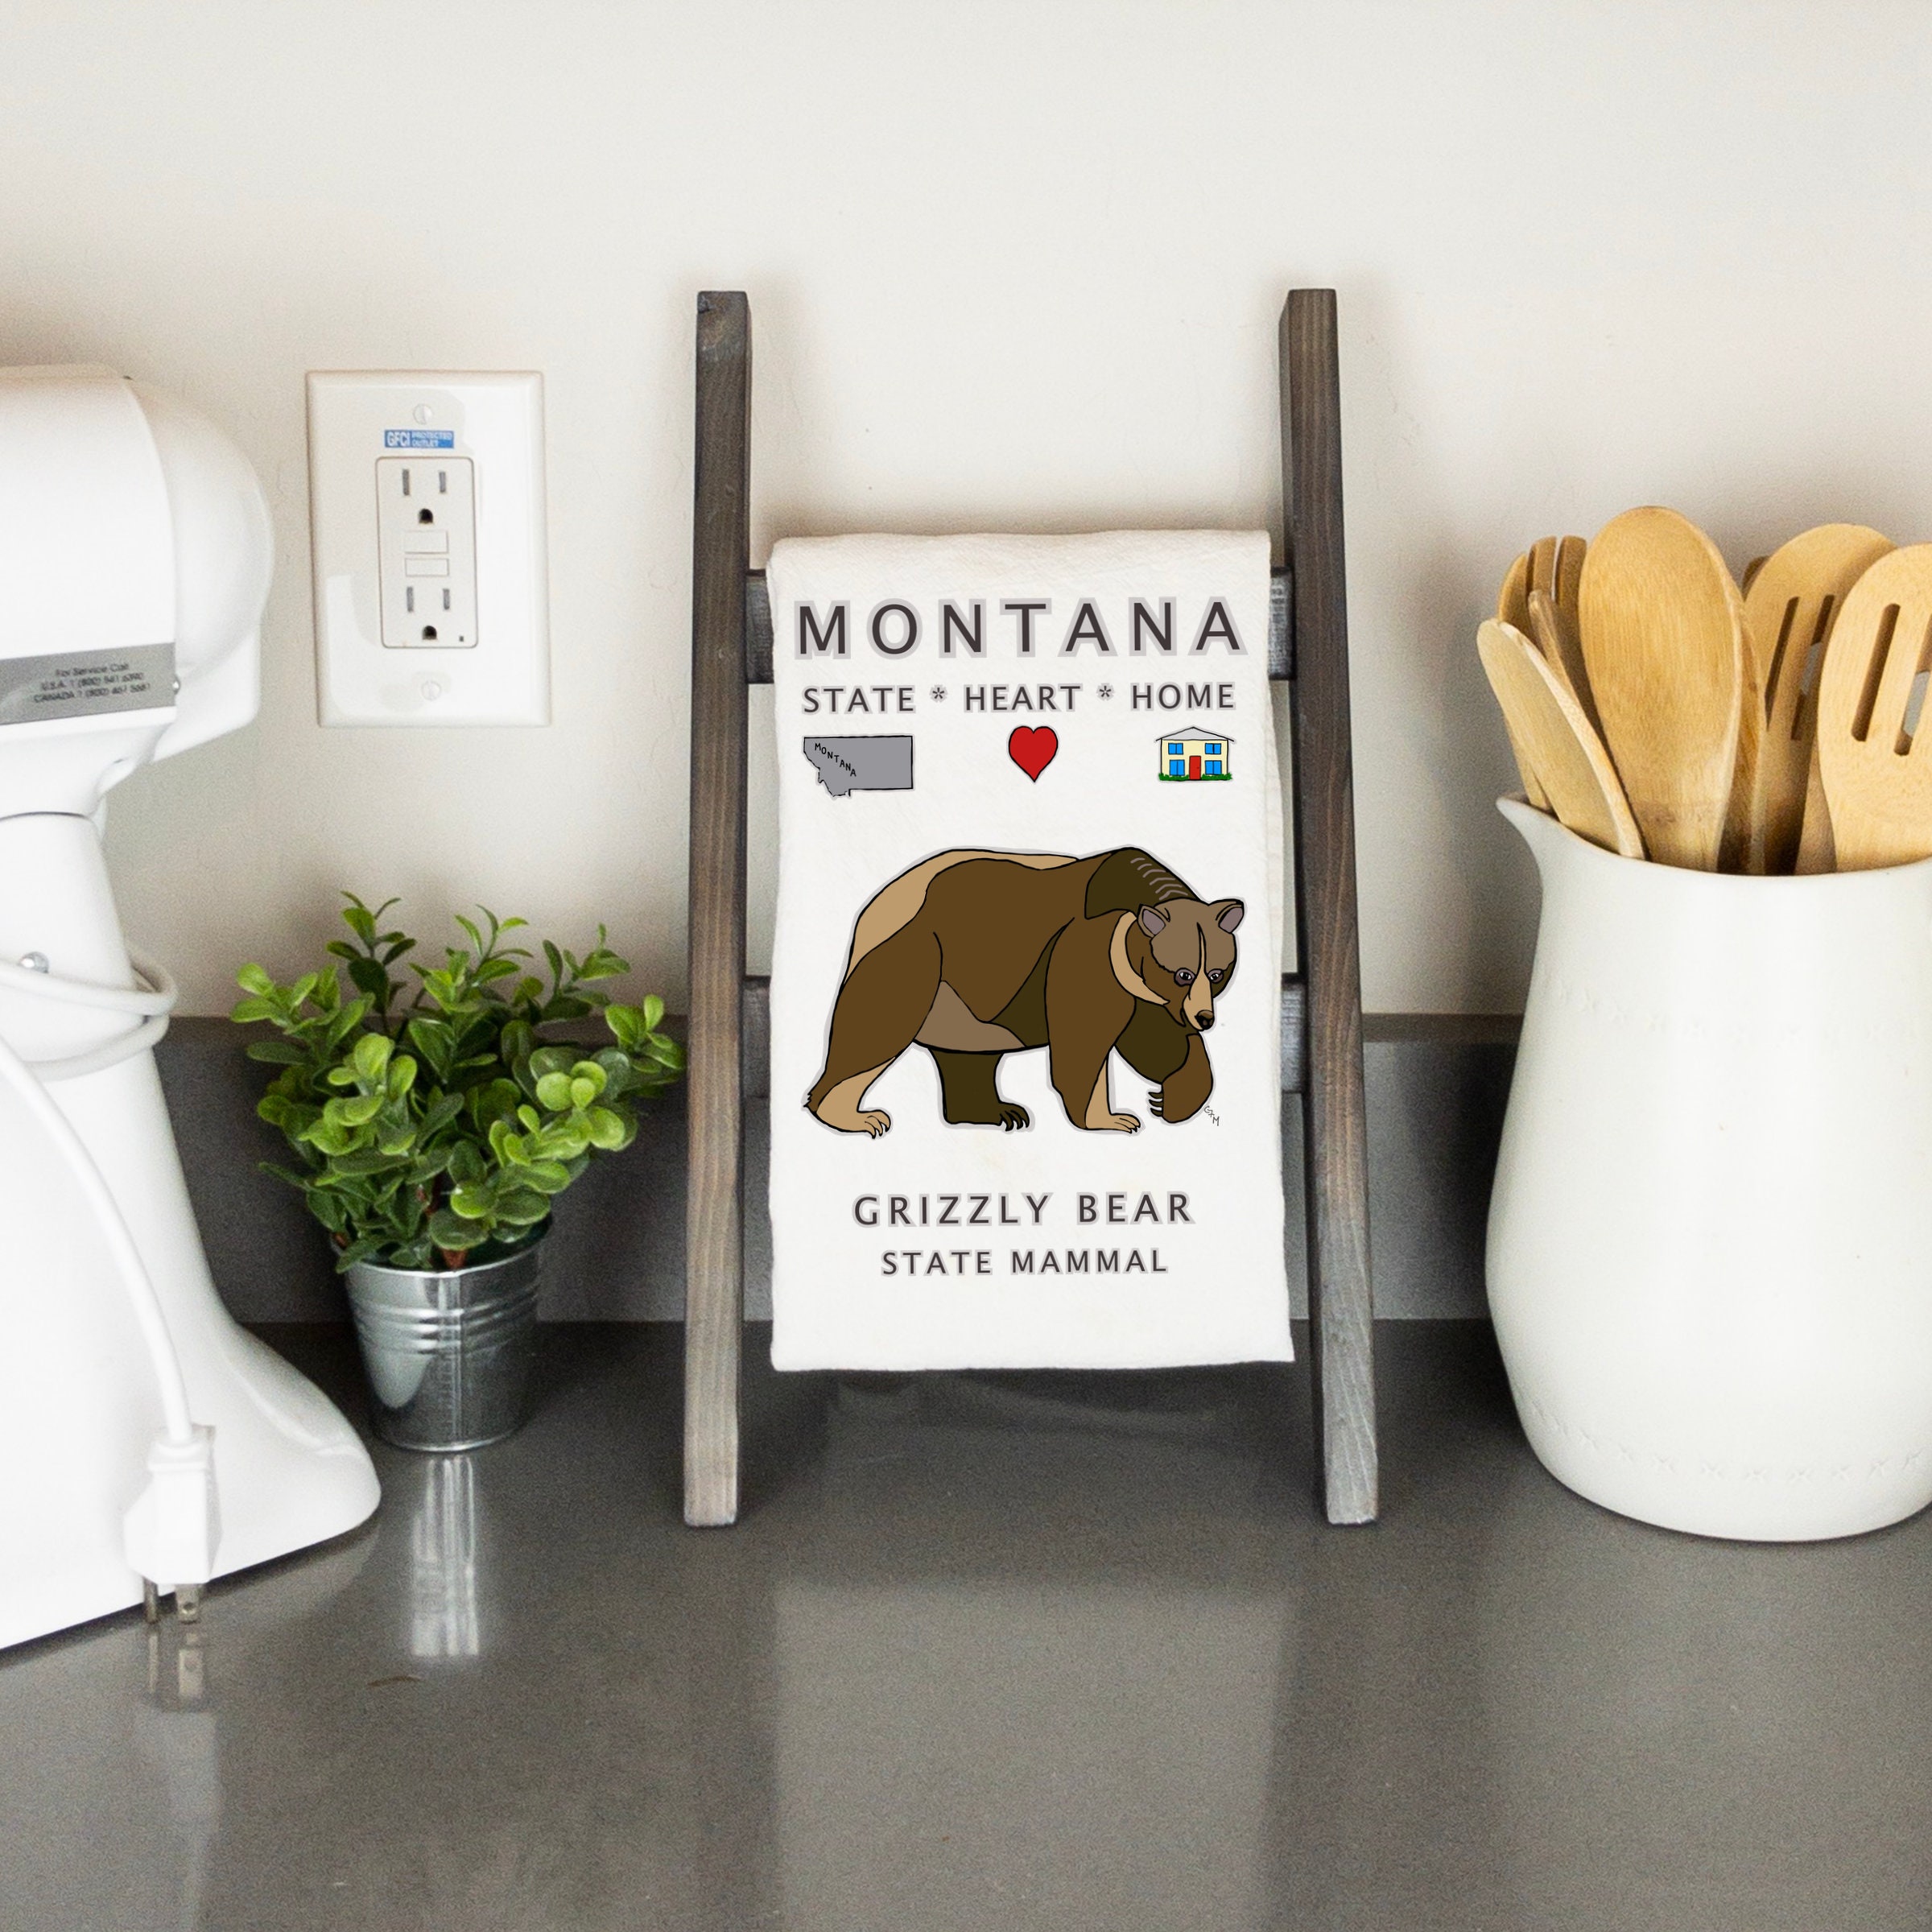 Grizzly Kitchen Towel - Grizzly bear conservation and protection